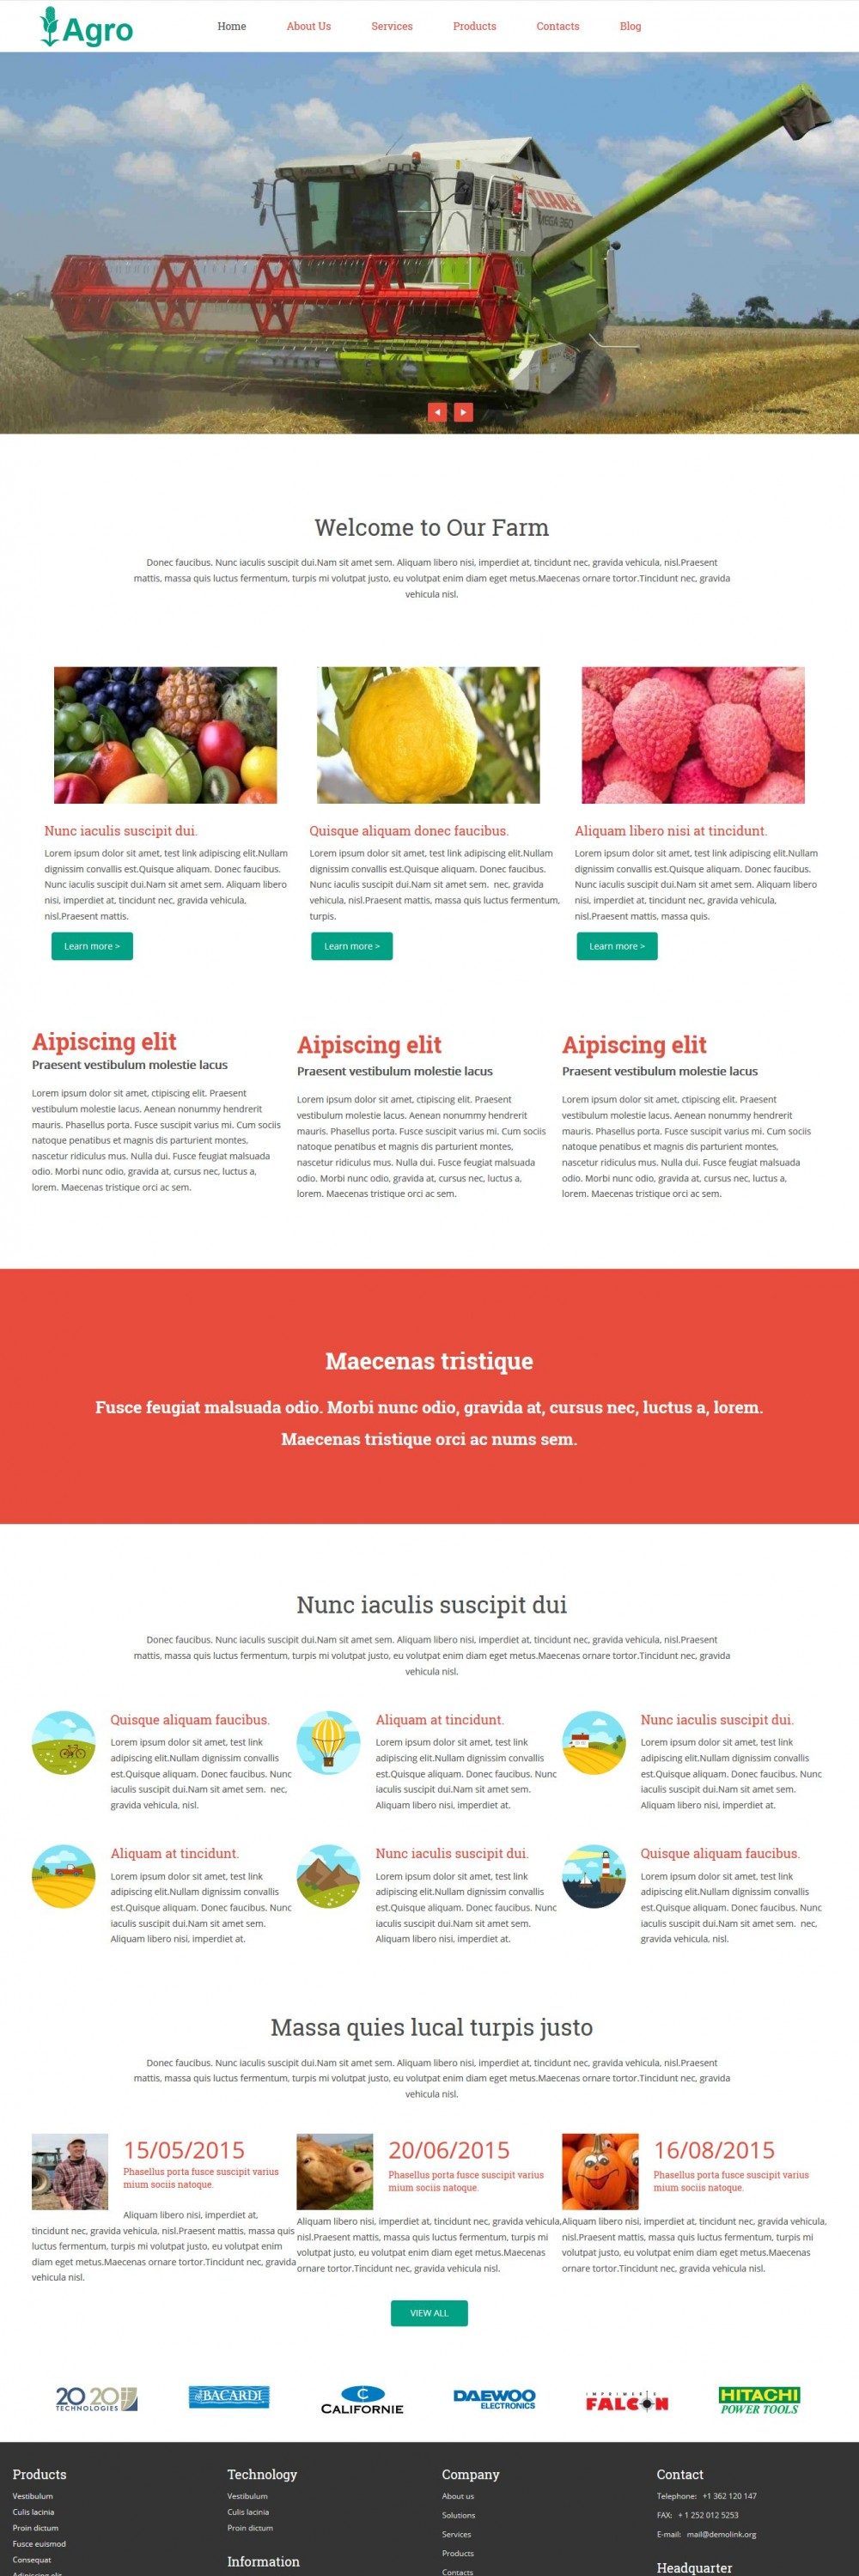 Agro - Agricultural Drupal Theme for Farms